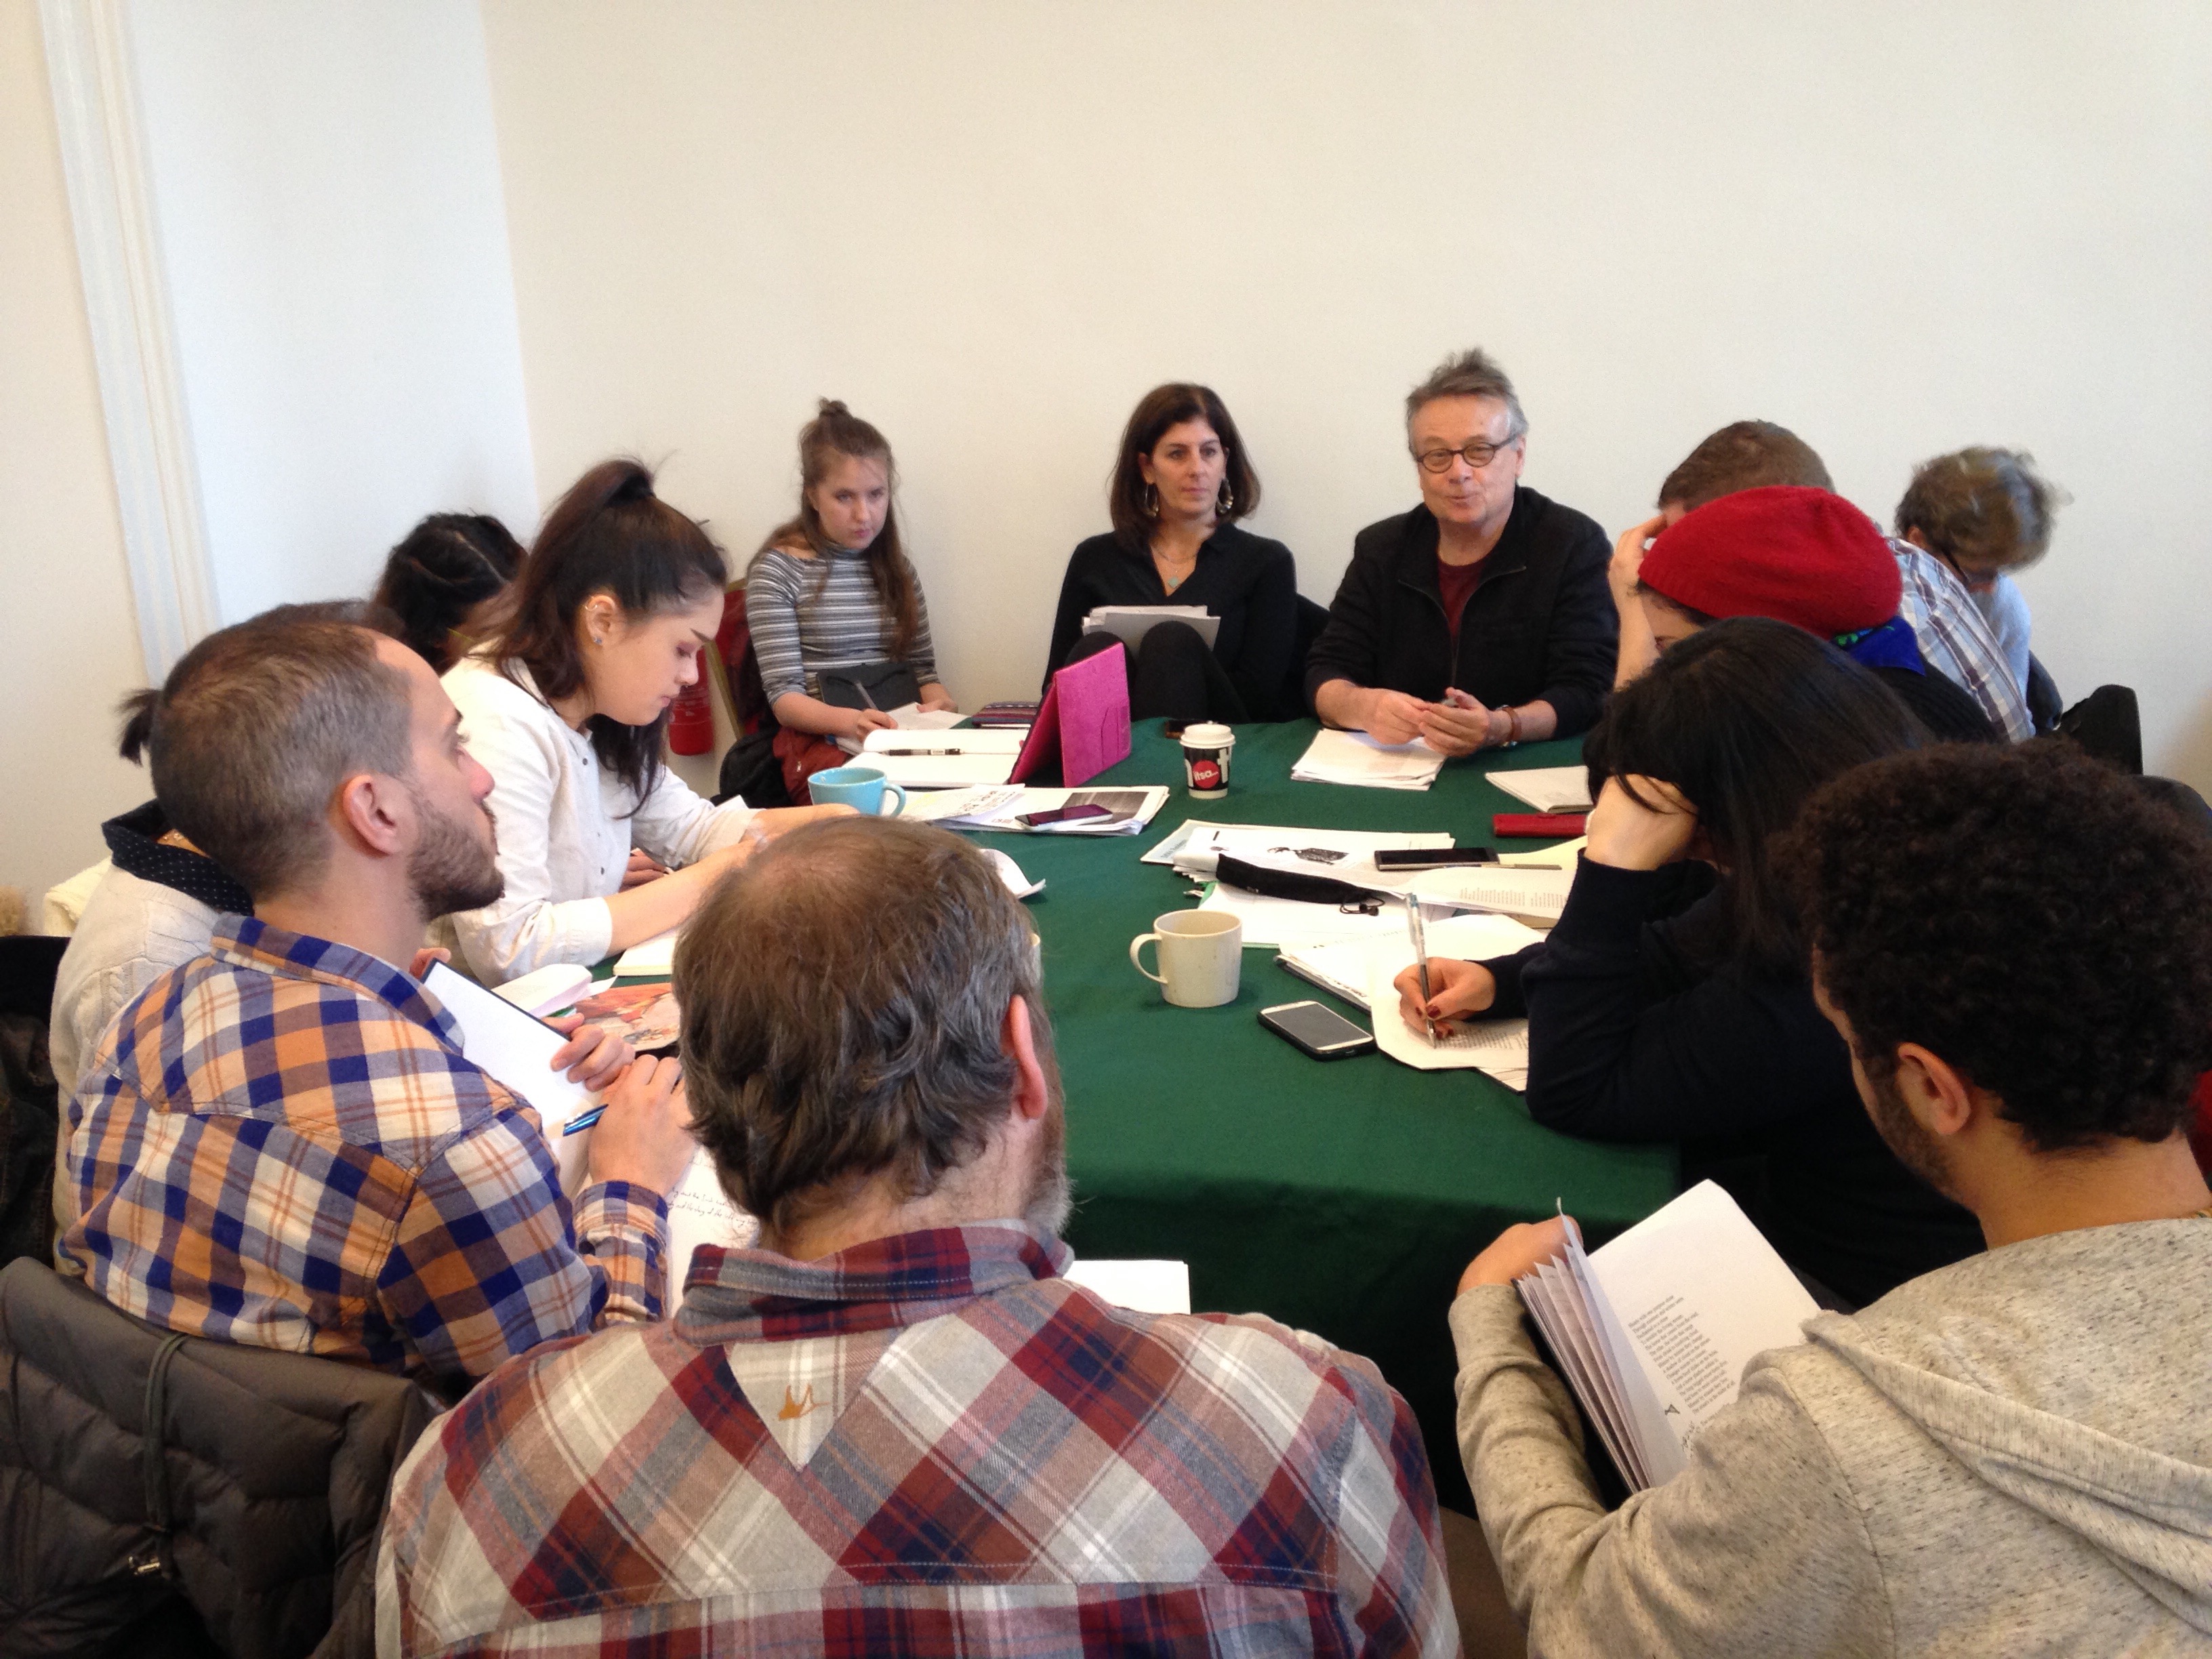 Workshop participants in session with David Lloyd and Emily Jacir at IMMA